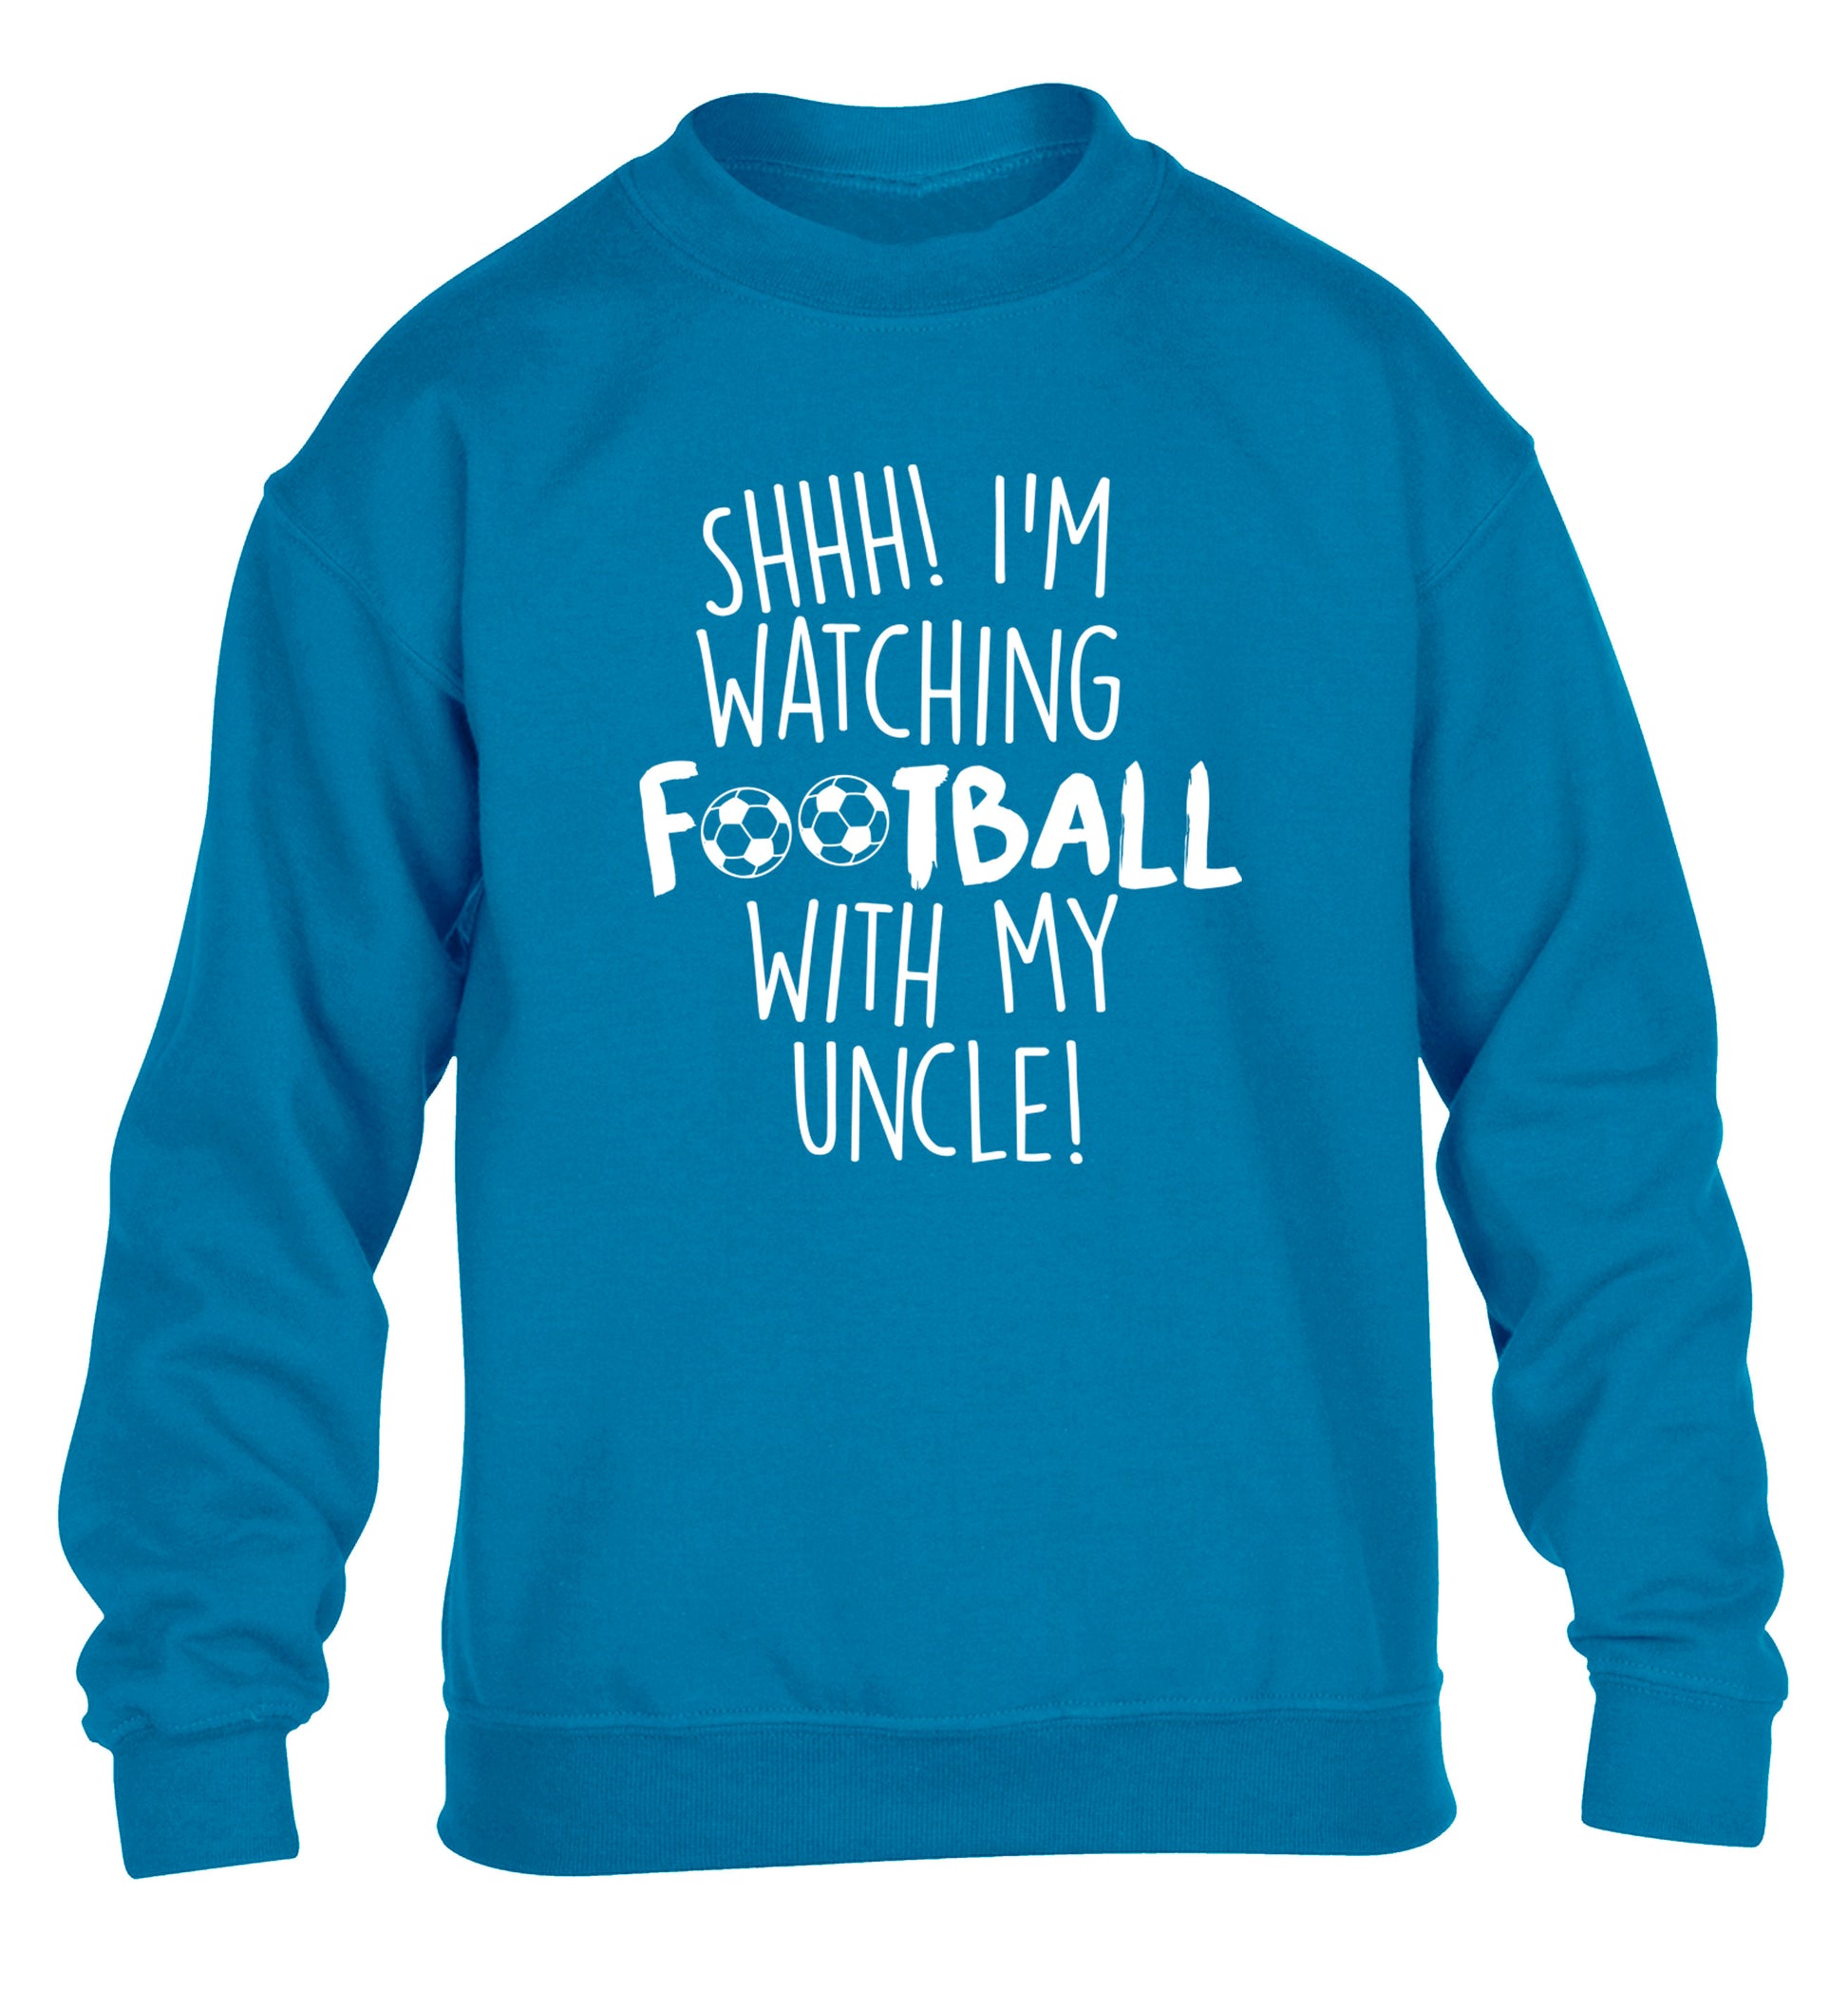 Shhh I'm watching football with my uncle children's blue sweater 12-14 Years